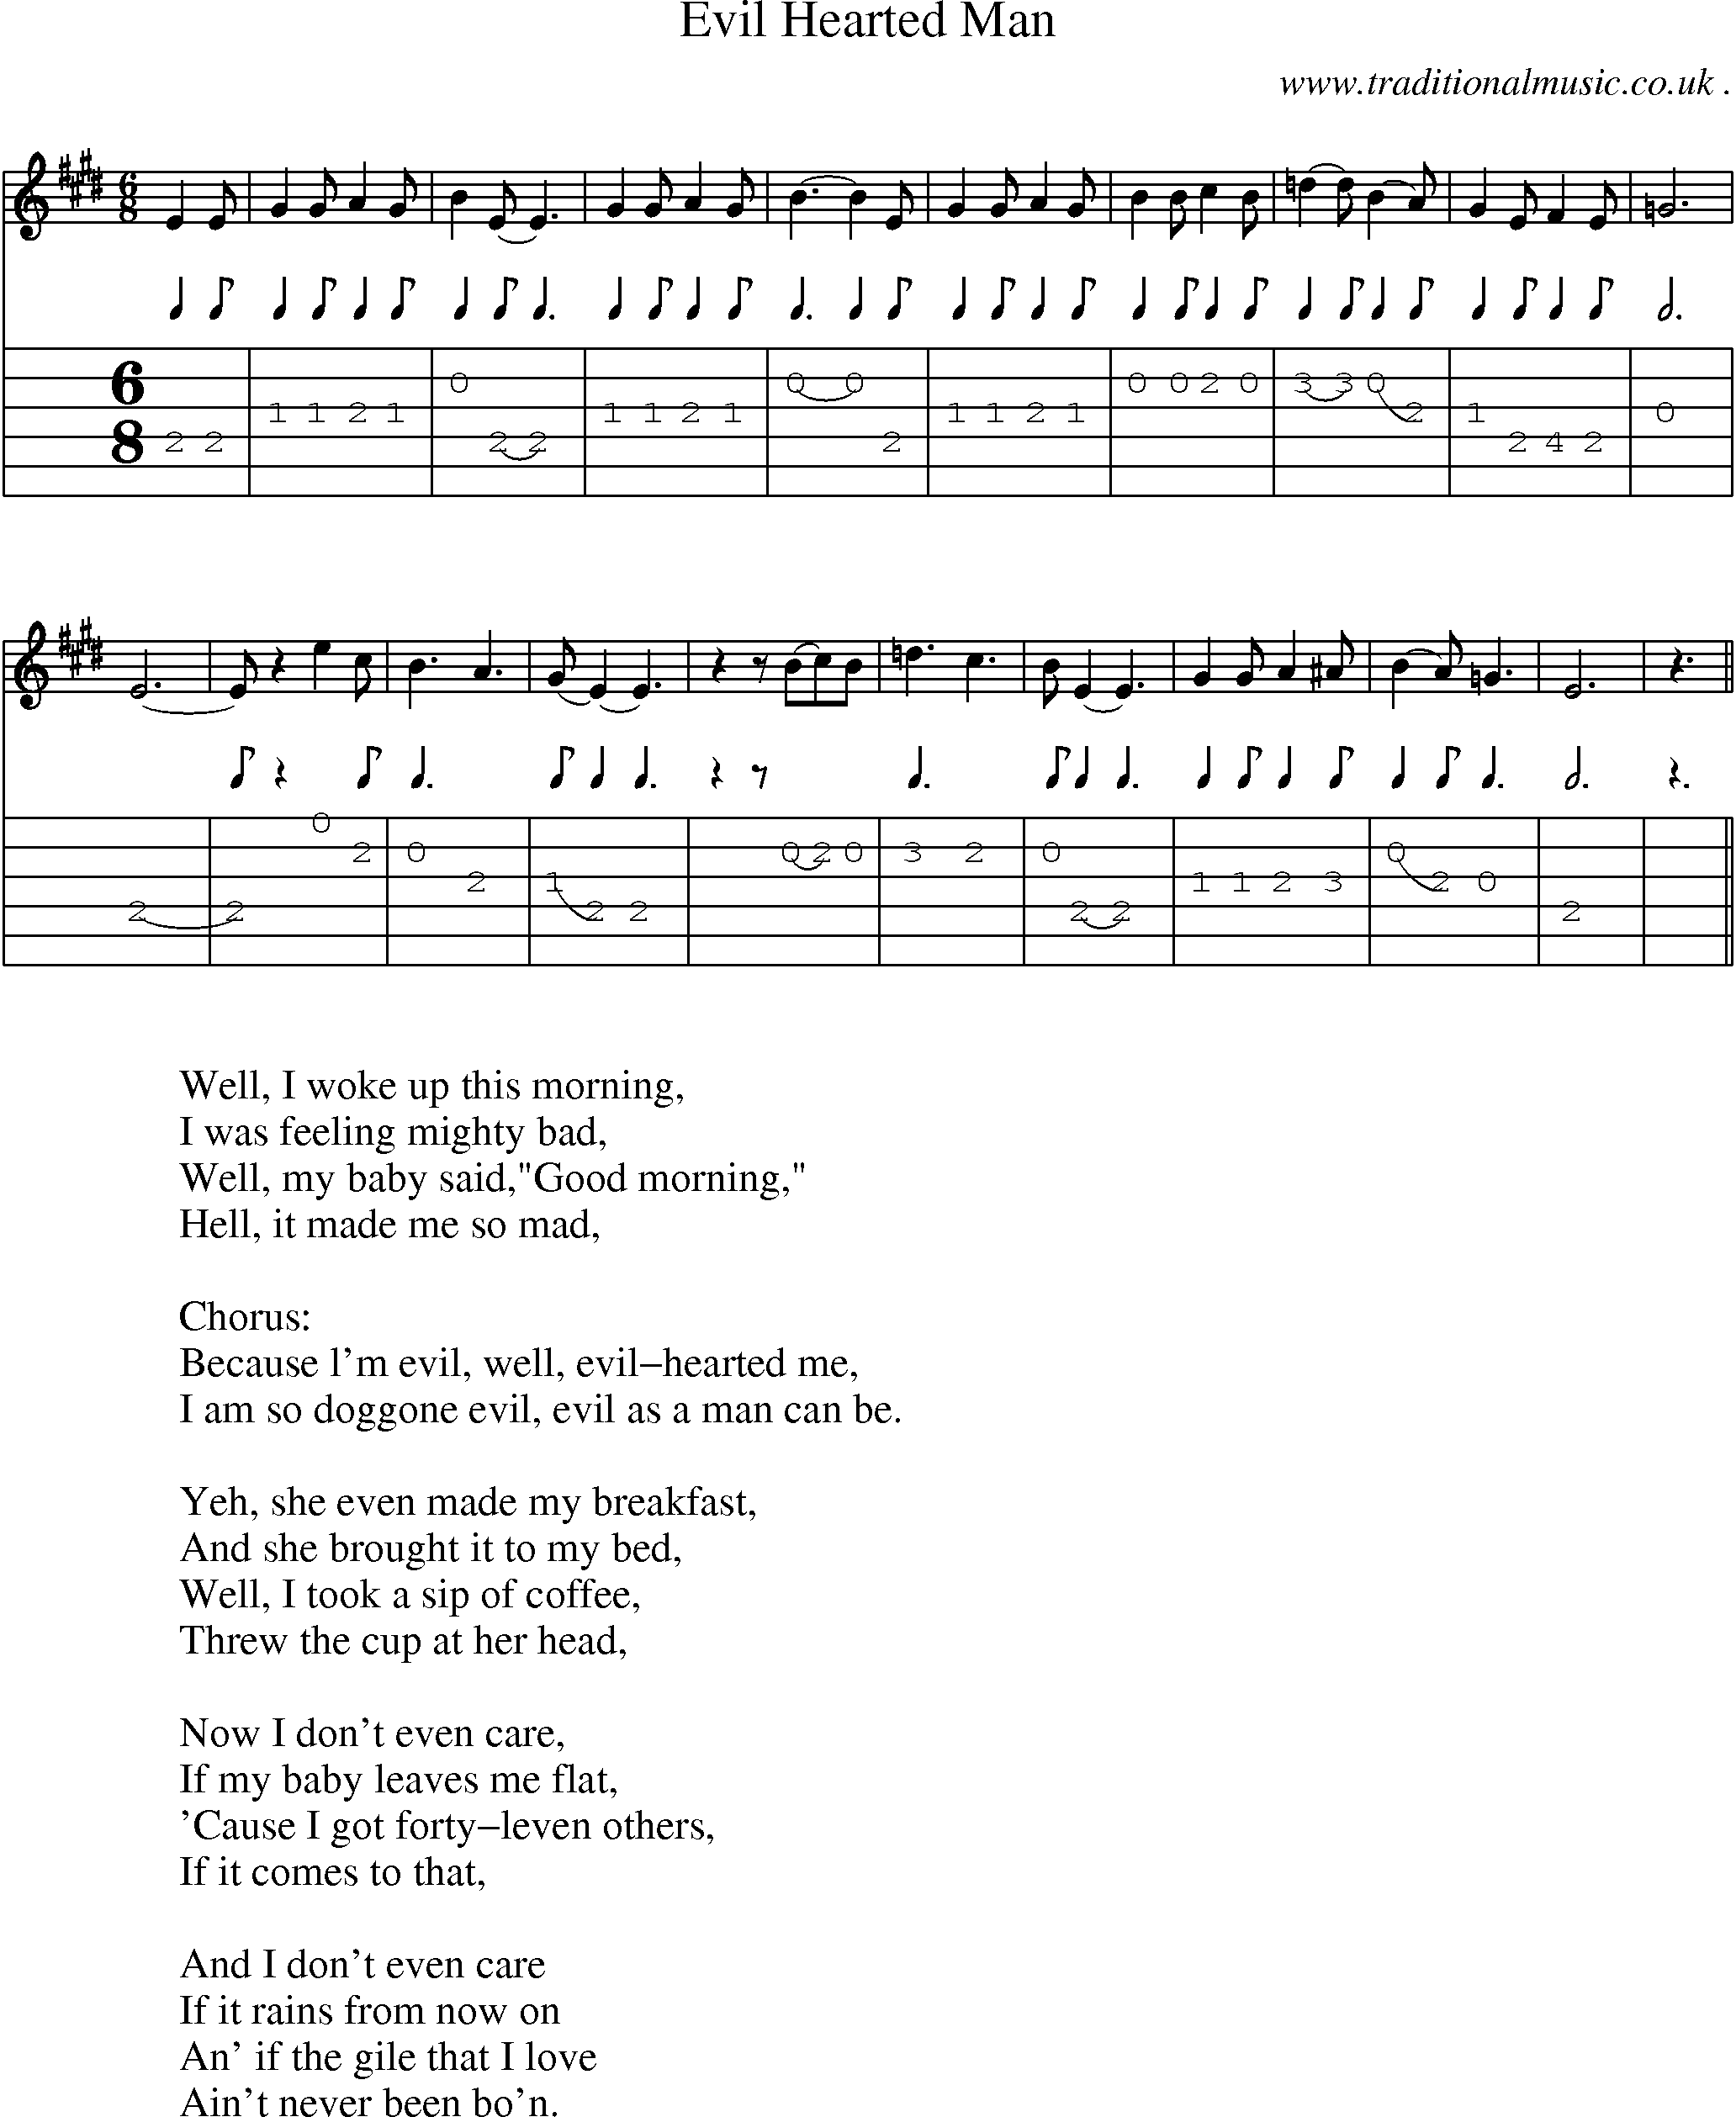 Sheet-Music and Guitar Tabs for Evil Hearted Man